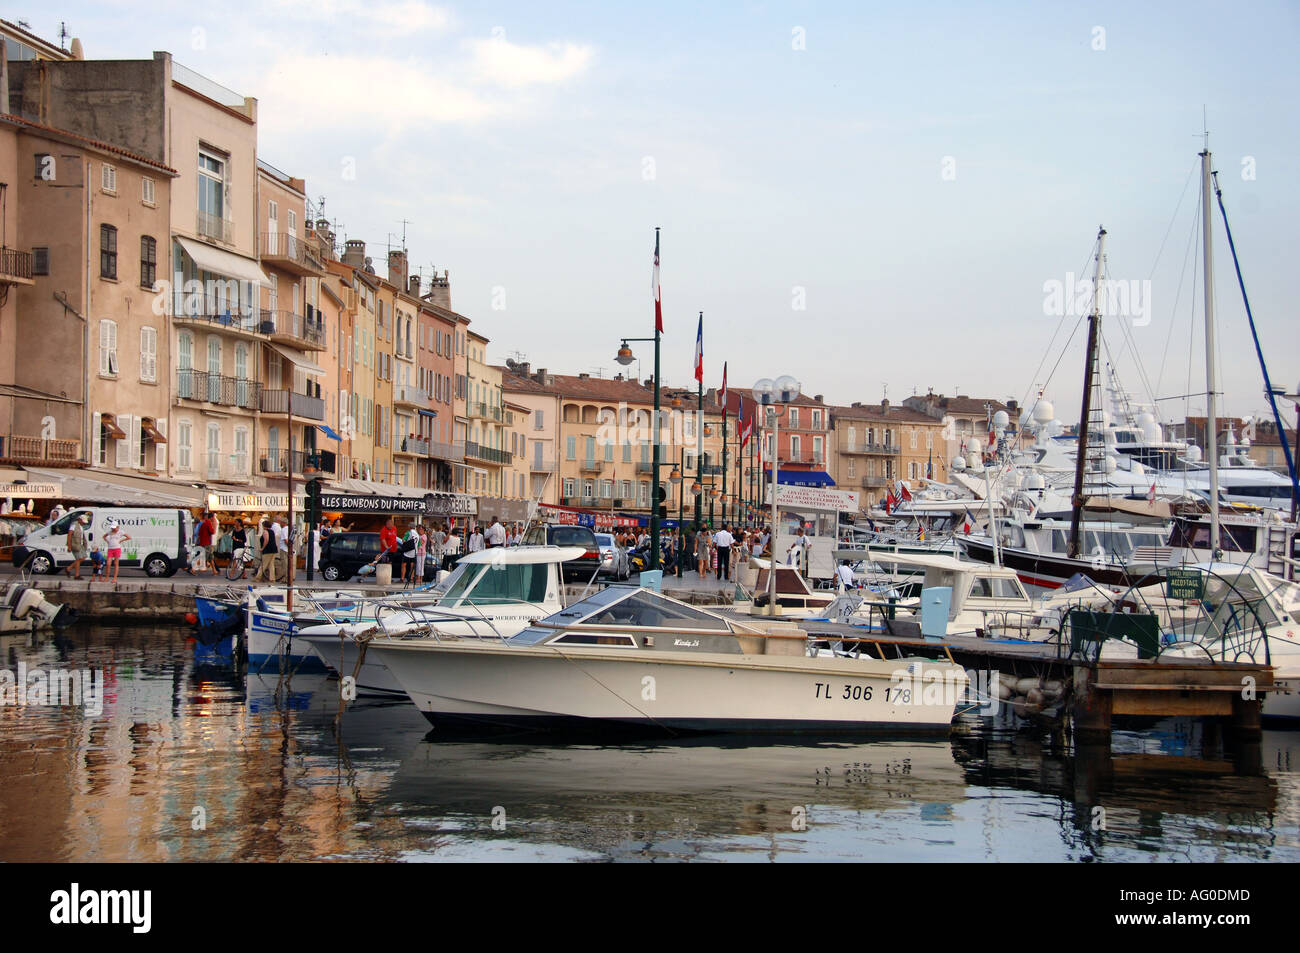 Boats and yachts moored in saint tropez harbour, southern france Stock ...